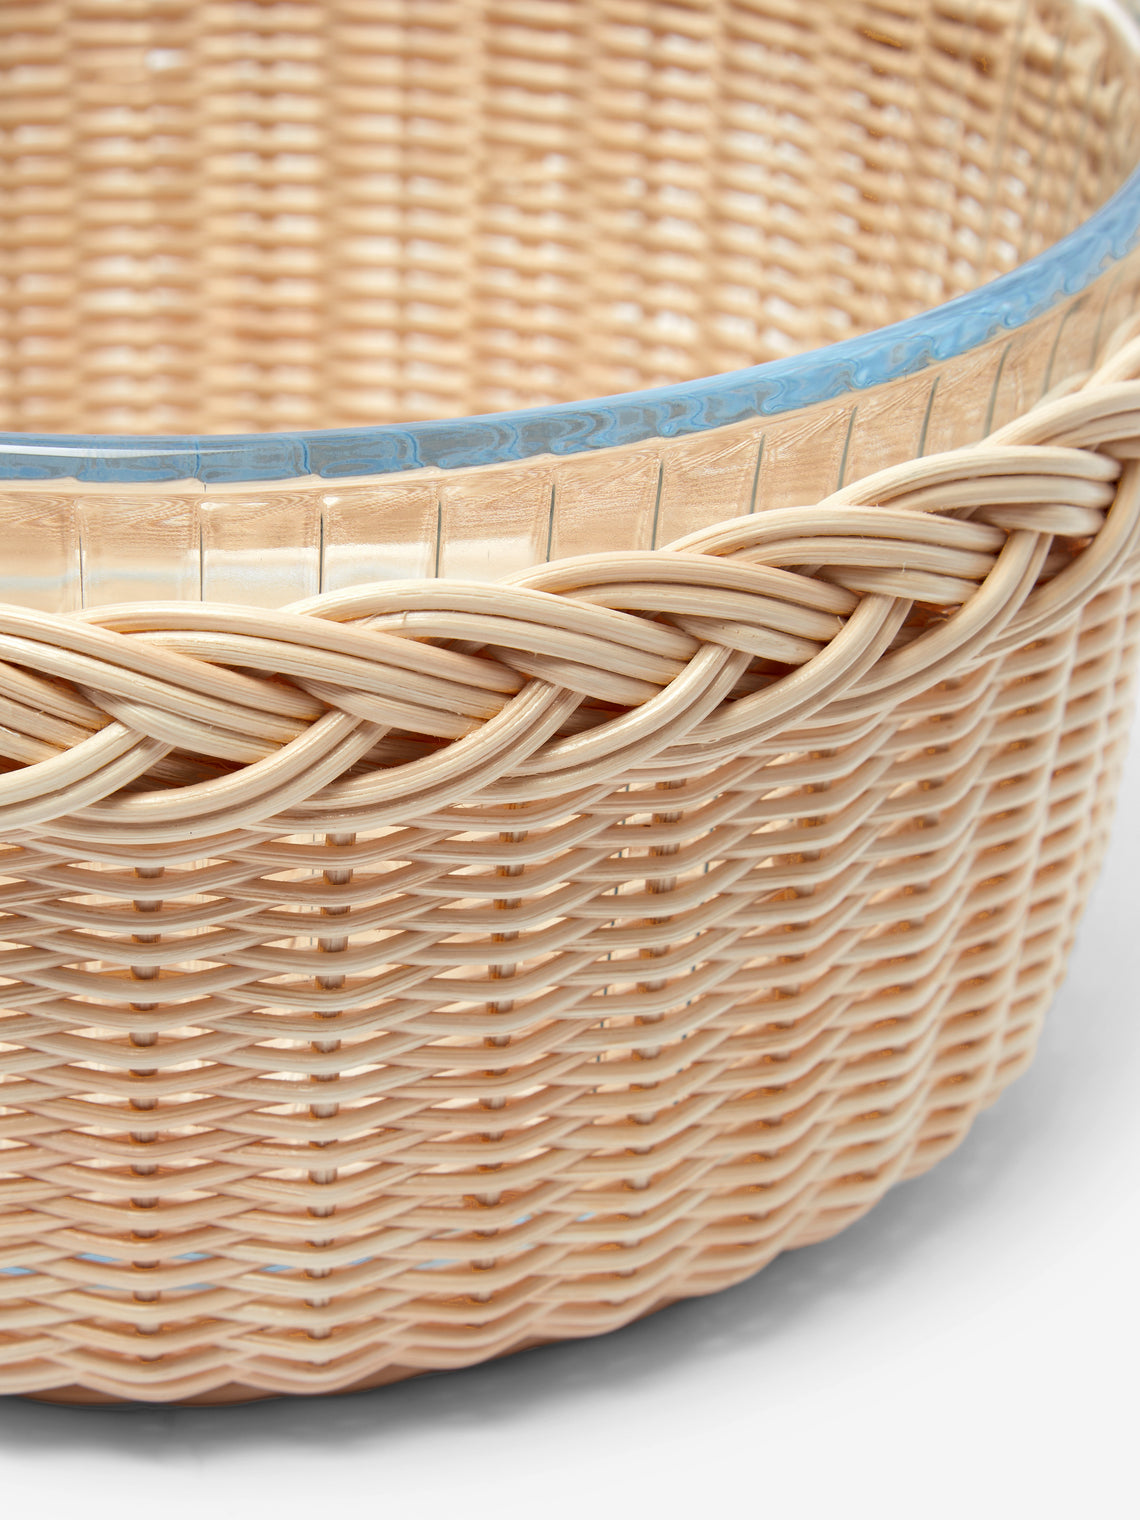 Mila Maurizi - Glicine Handwoven Wicker and Glass Serving Bowl -  - ABASK